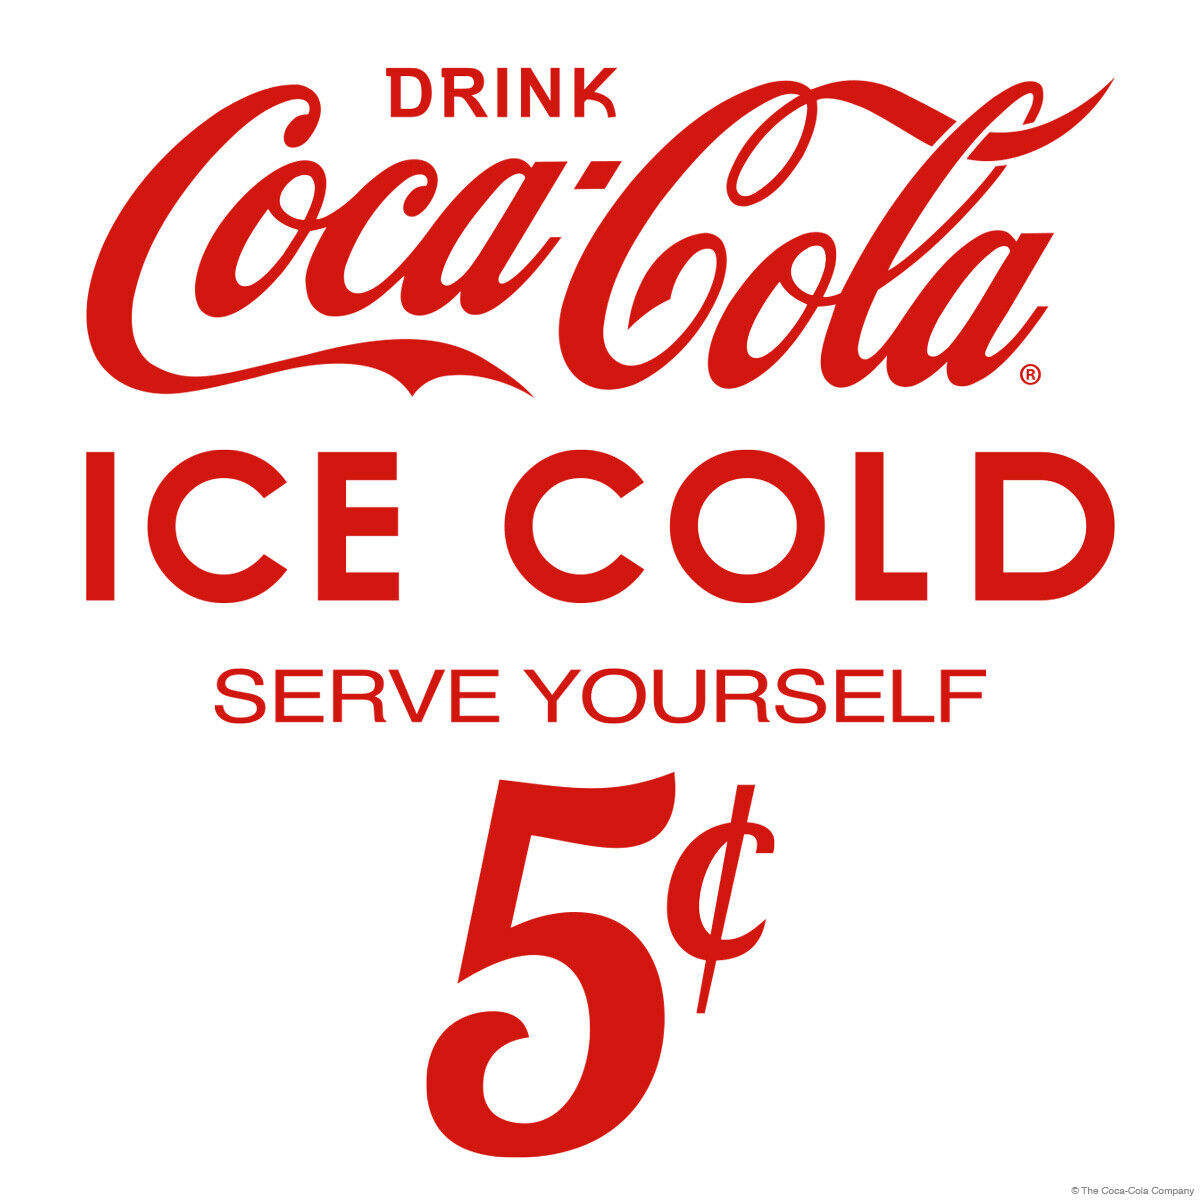 Drink Coca-Cola Ice Cold 5 Cents Cut Out Vinyl Sticker Set Officially Licensed 